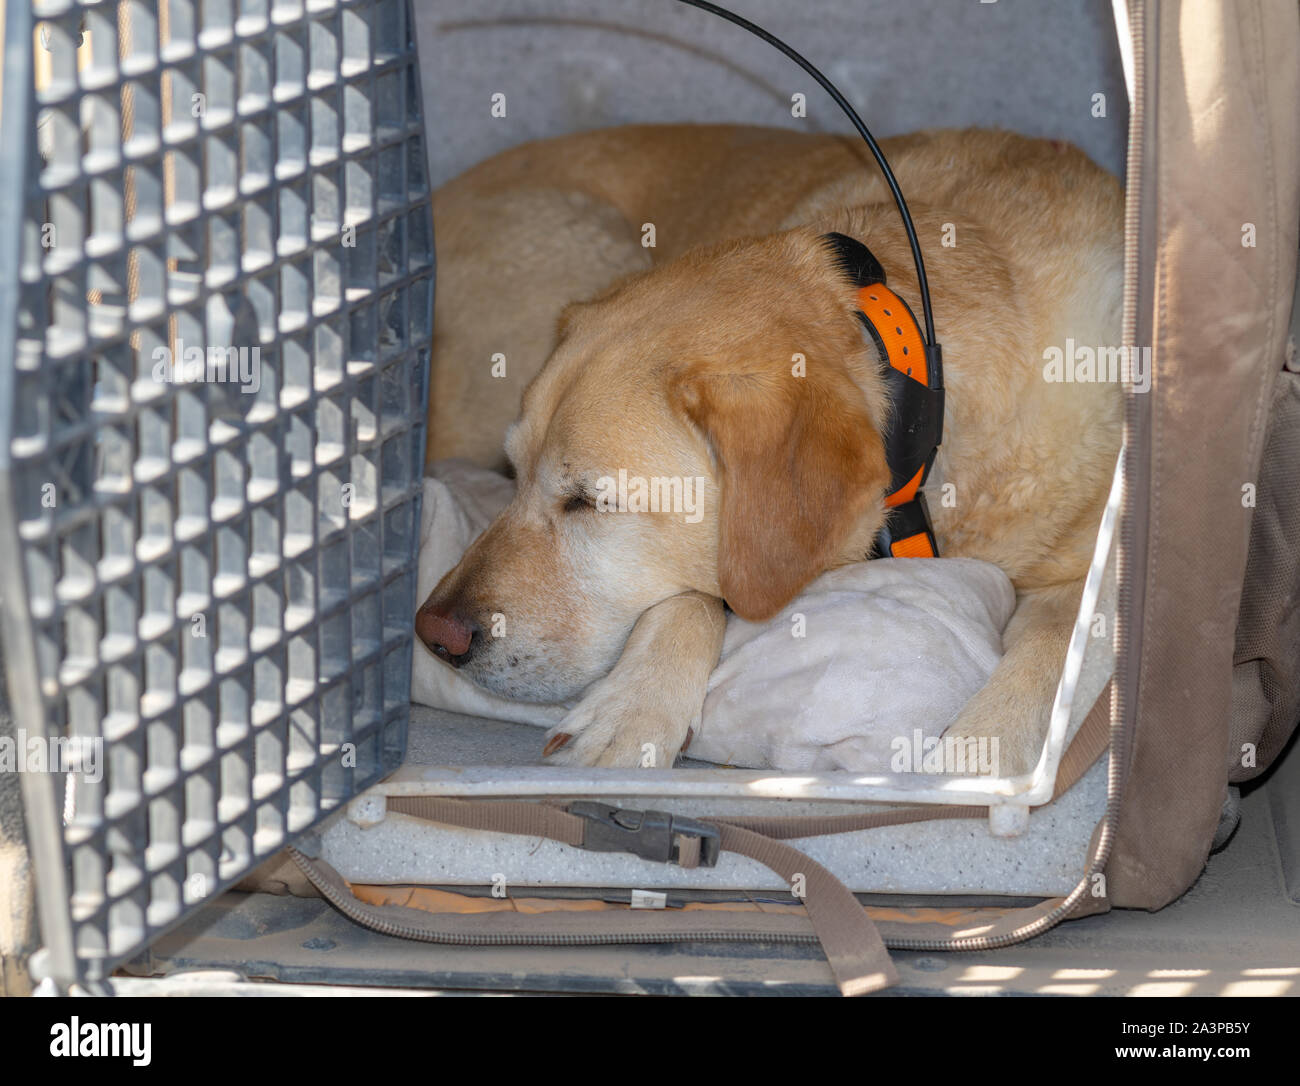 Yellow labrador retriever dog with a GPS tracking collar sleeping in a dog kennel. Stock Photo